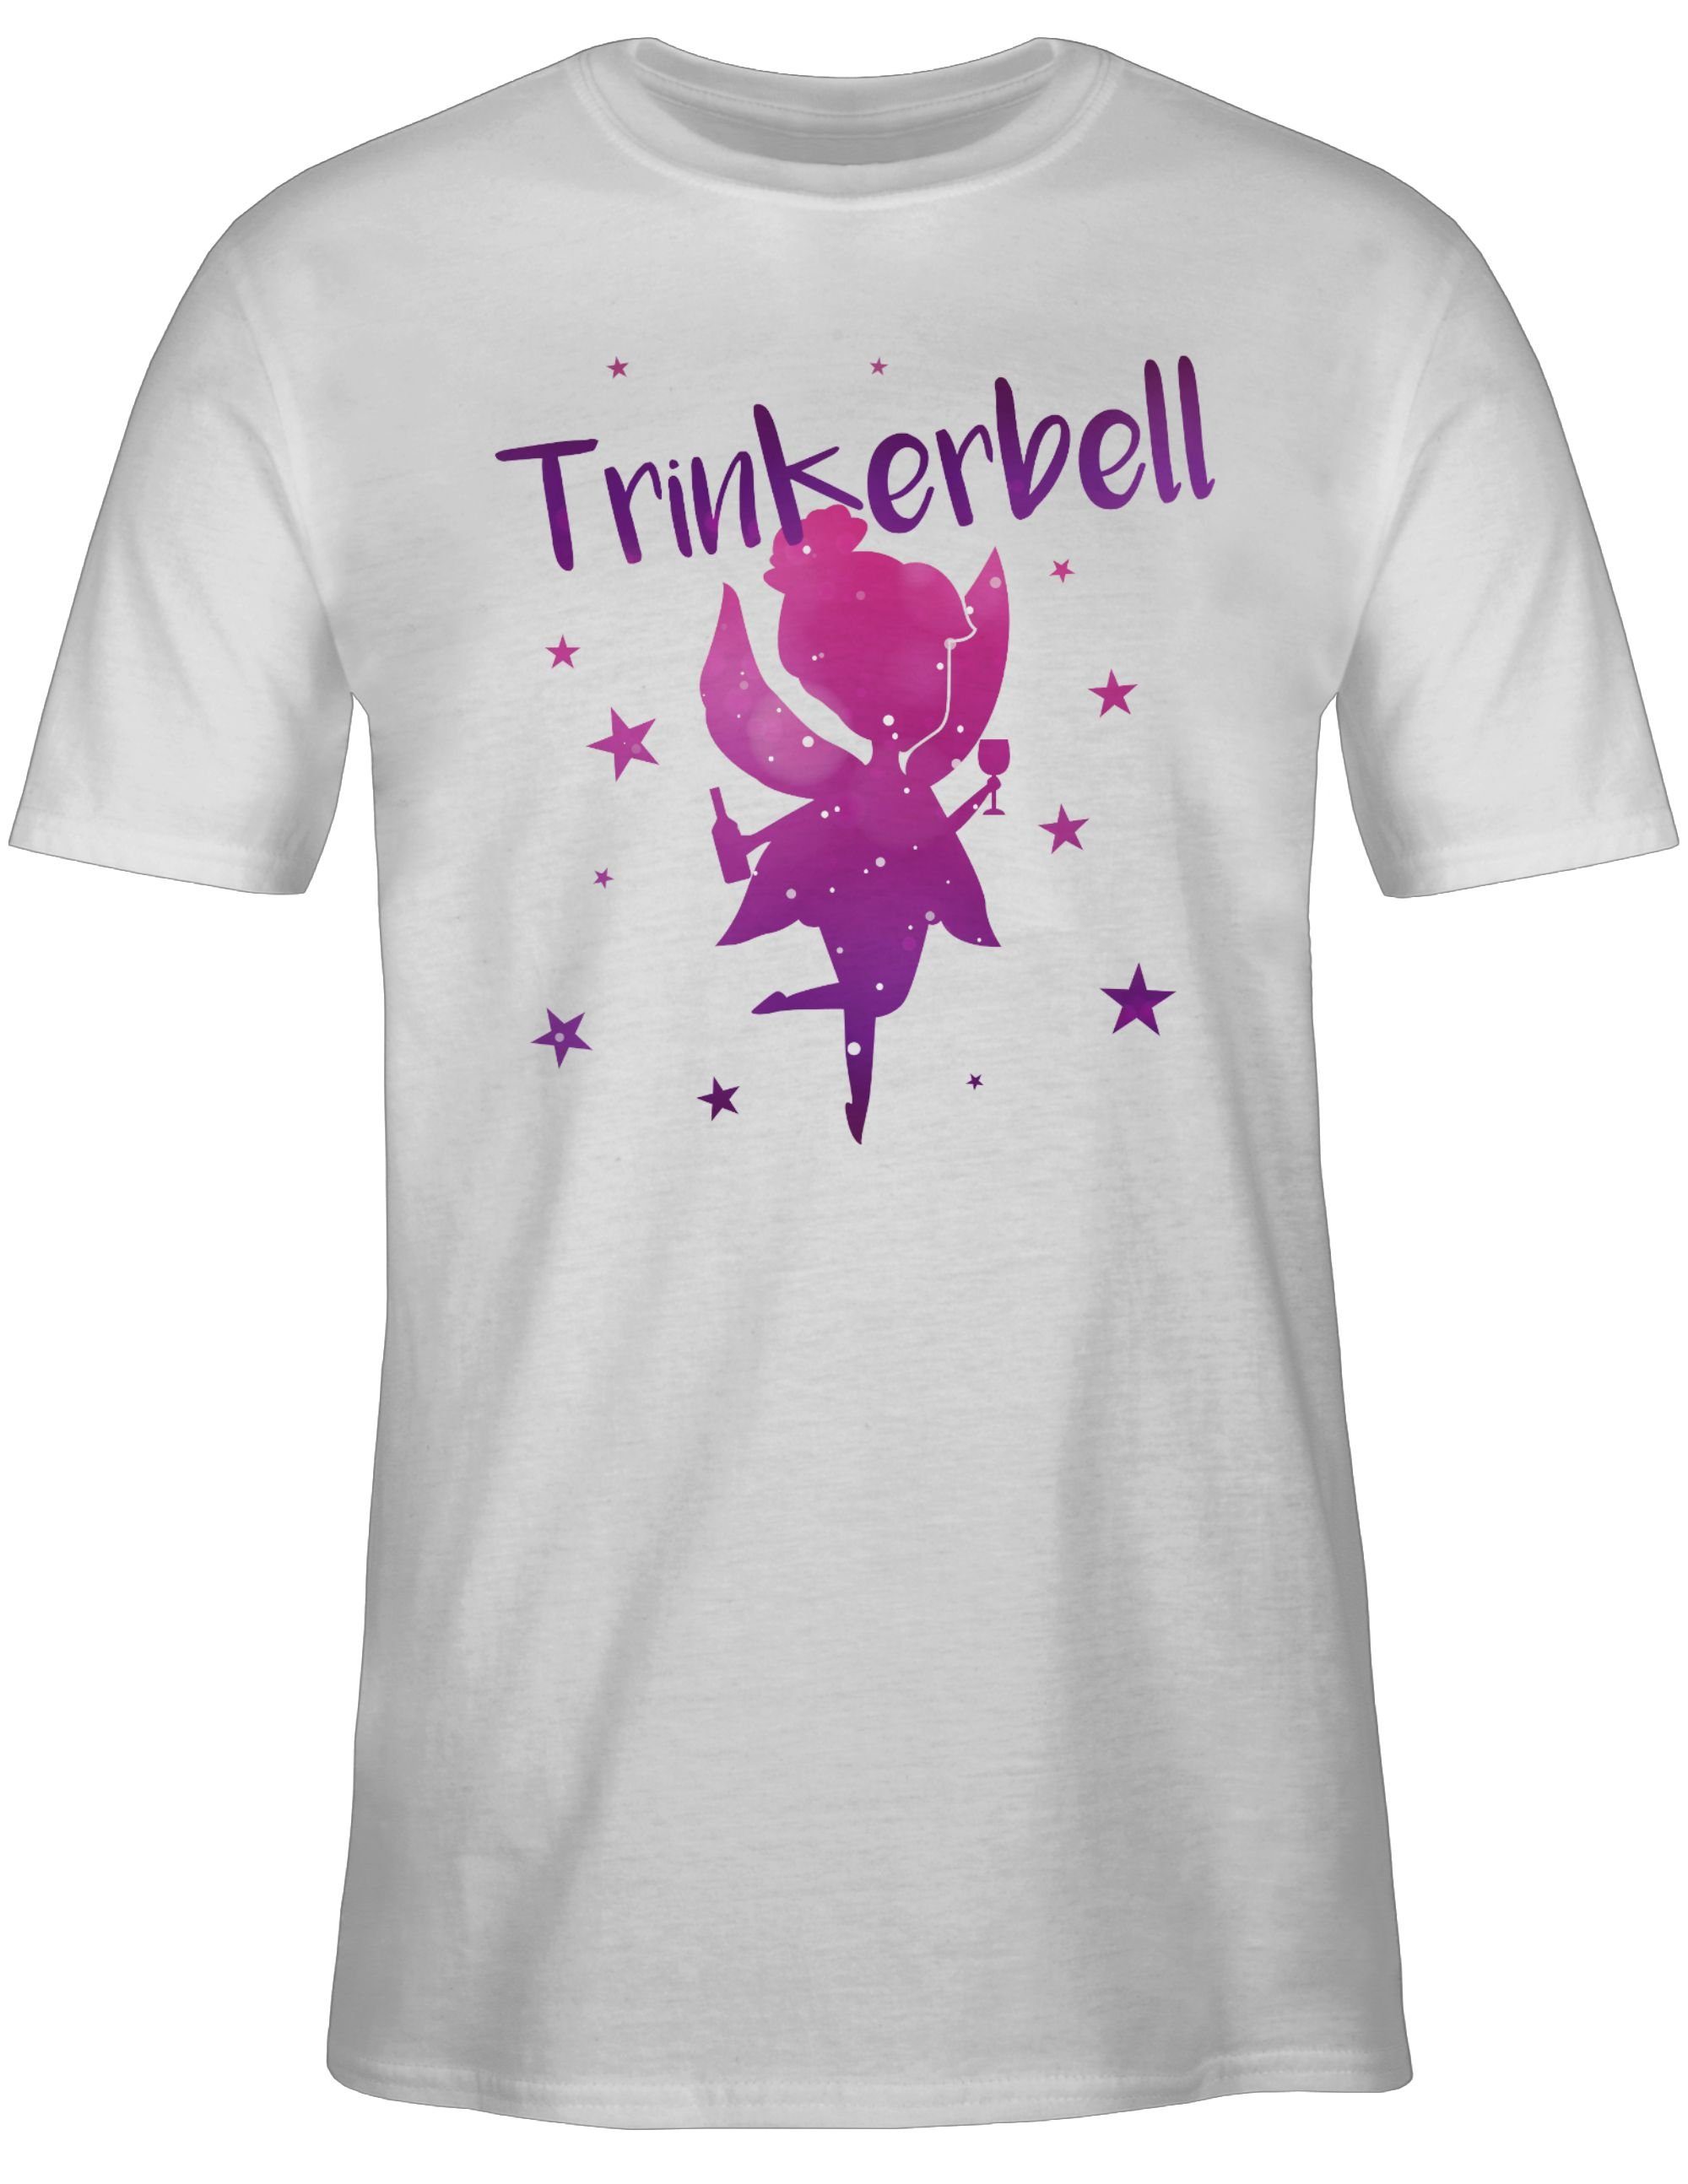 Shirtracer T-Shirt Trinkerbell Karneval Outfit 2 Weiß